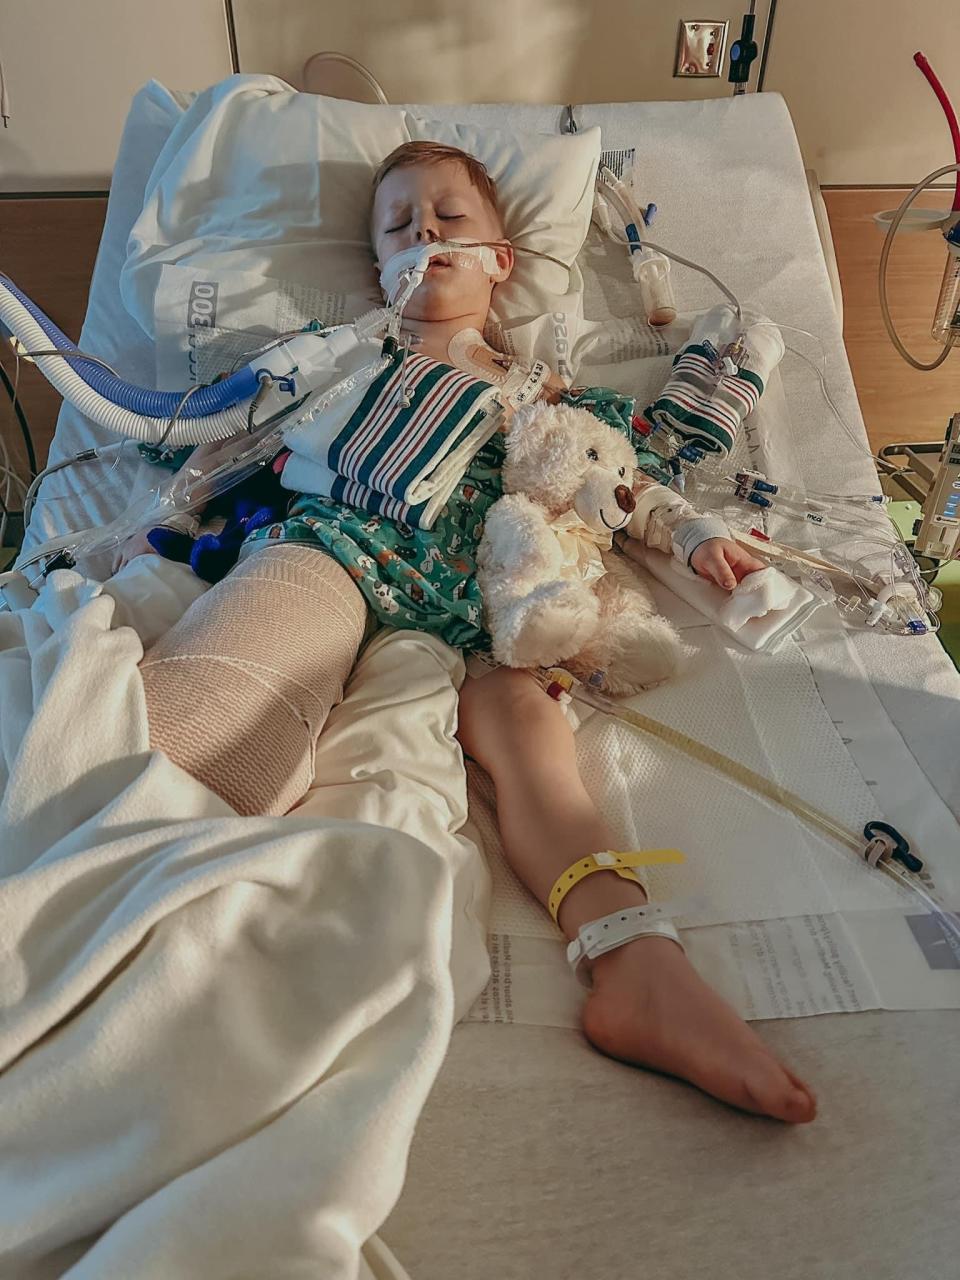 Three-year-old Zeke Clark of Lewes, pictured here at Nemours Children's Hospital, lost his leg below the knee in a June 7 lawnmower accident.